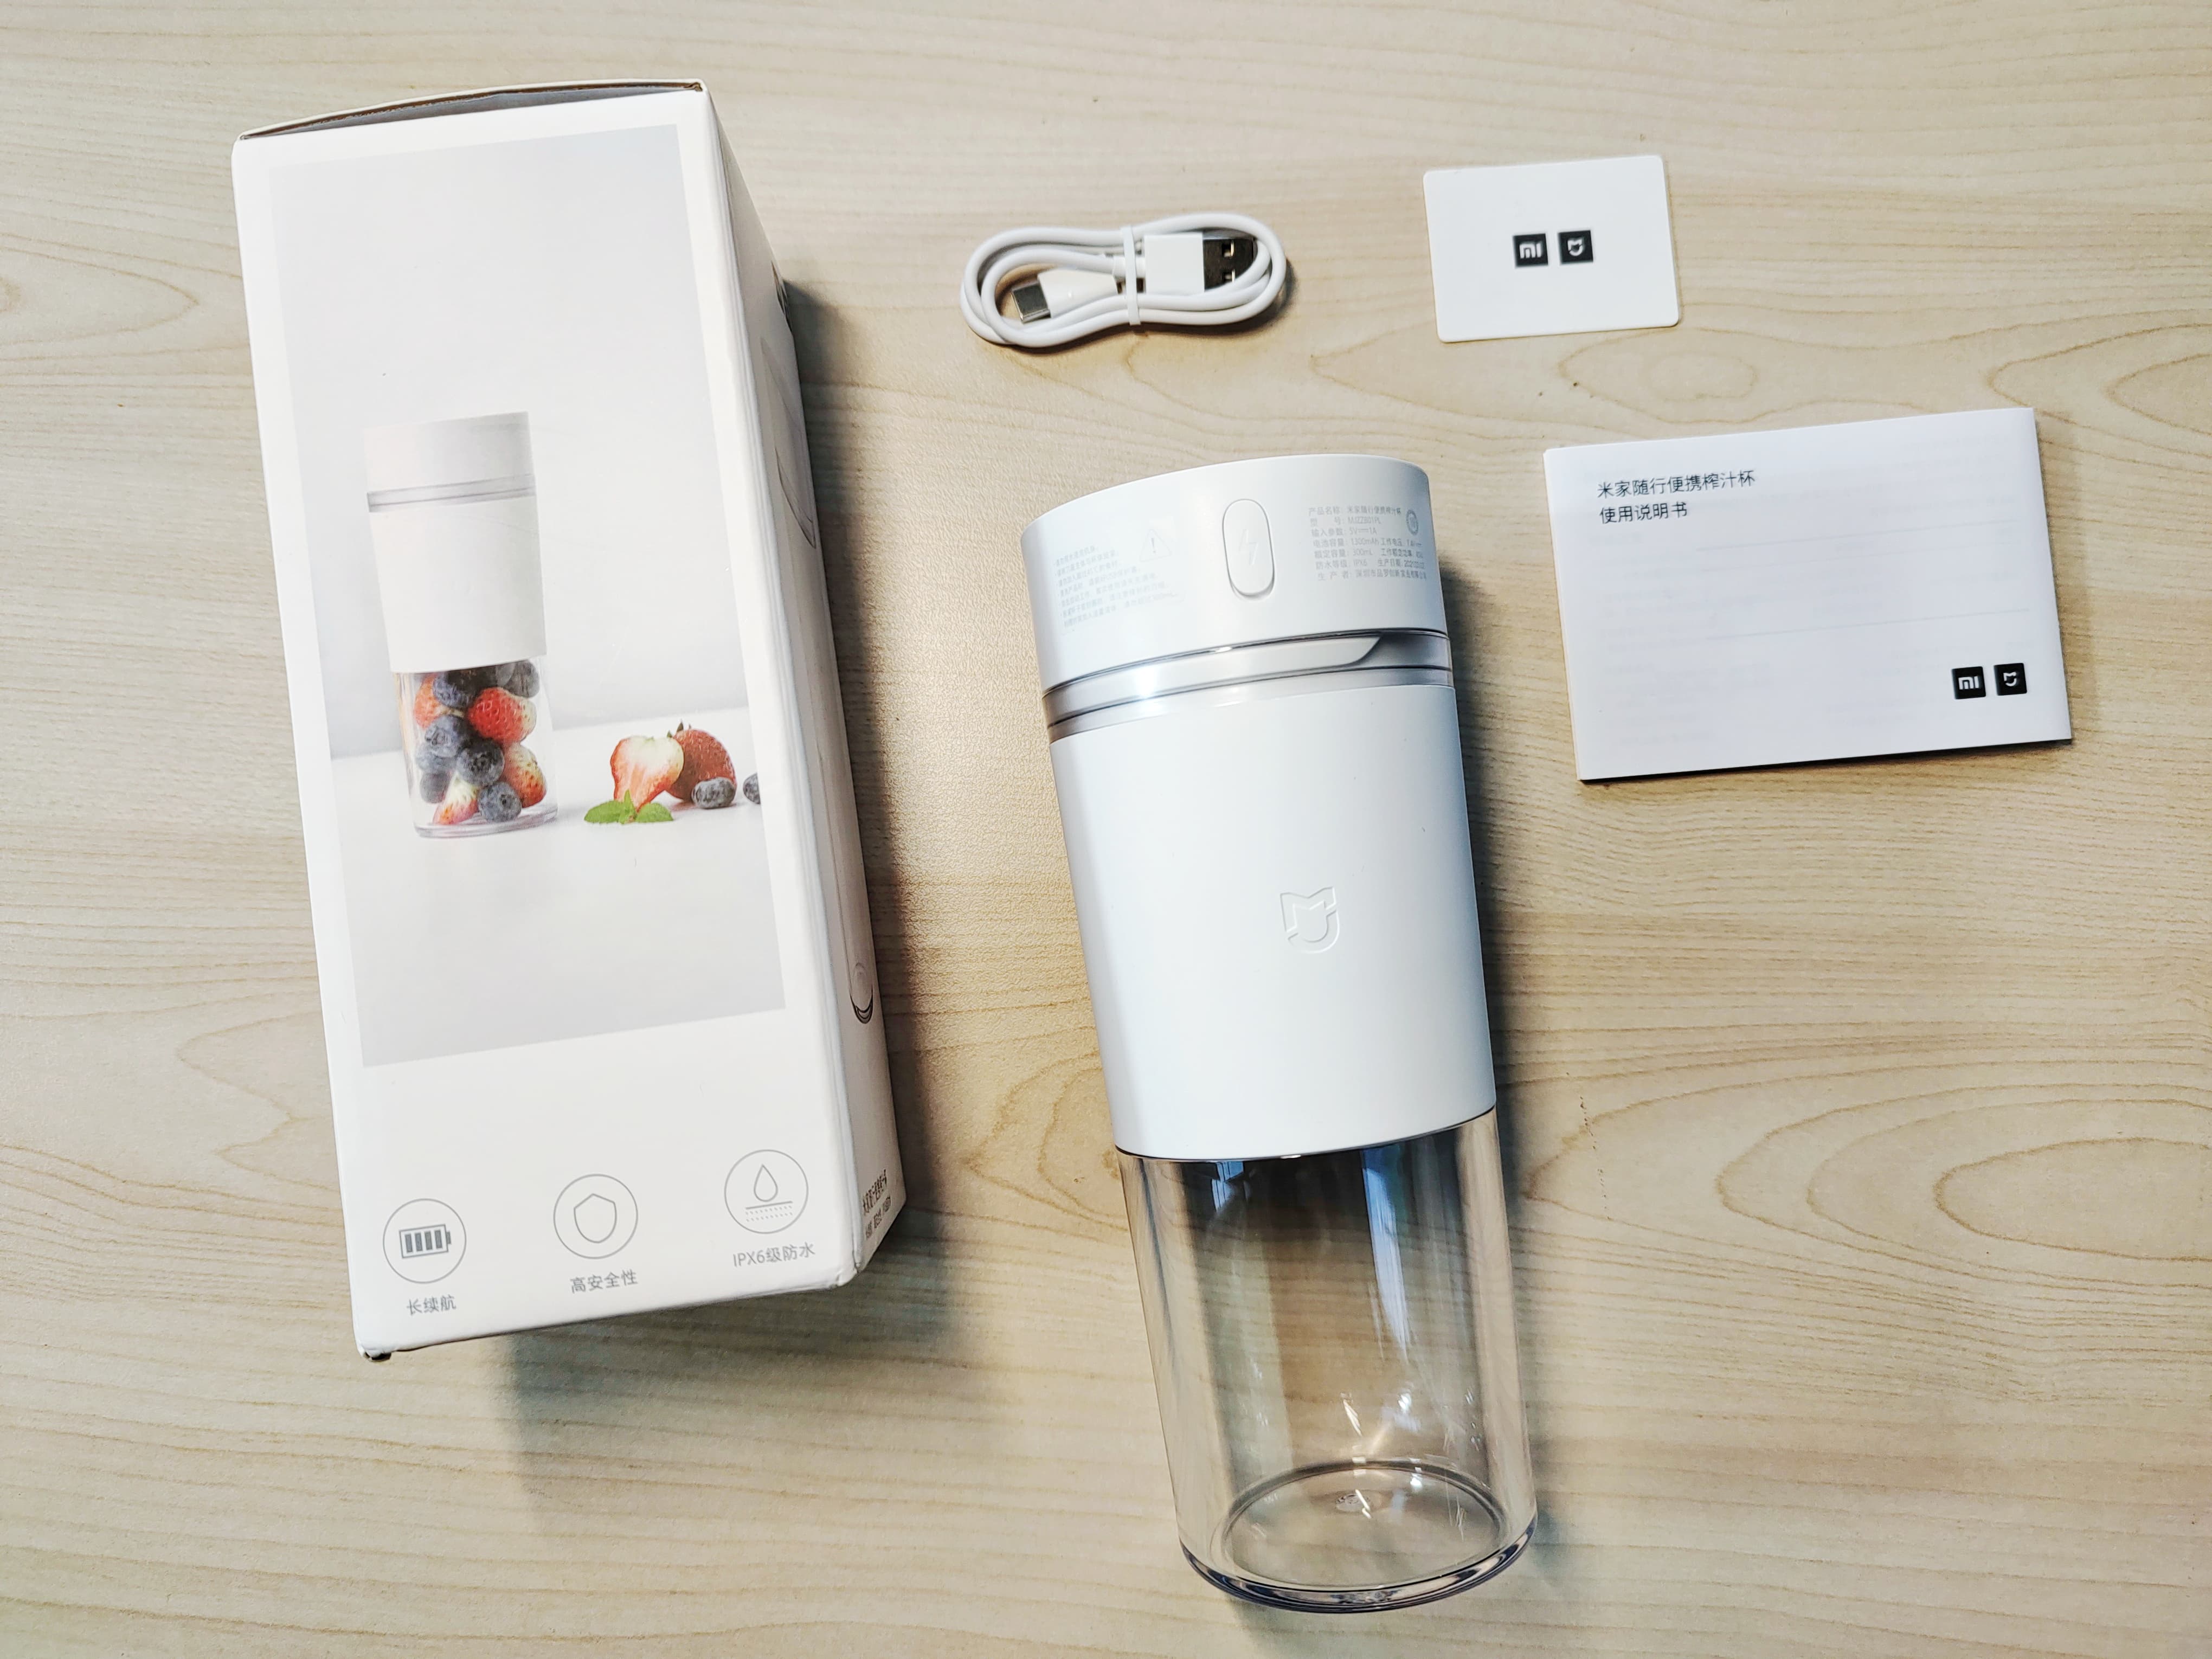 The Mijia crowdfunding little artifact is only 89 yuan out of the box